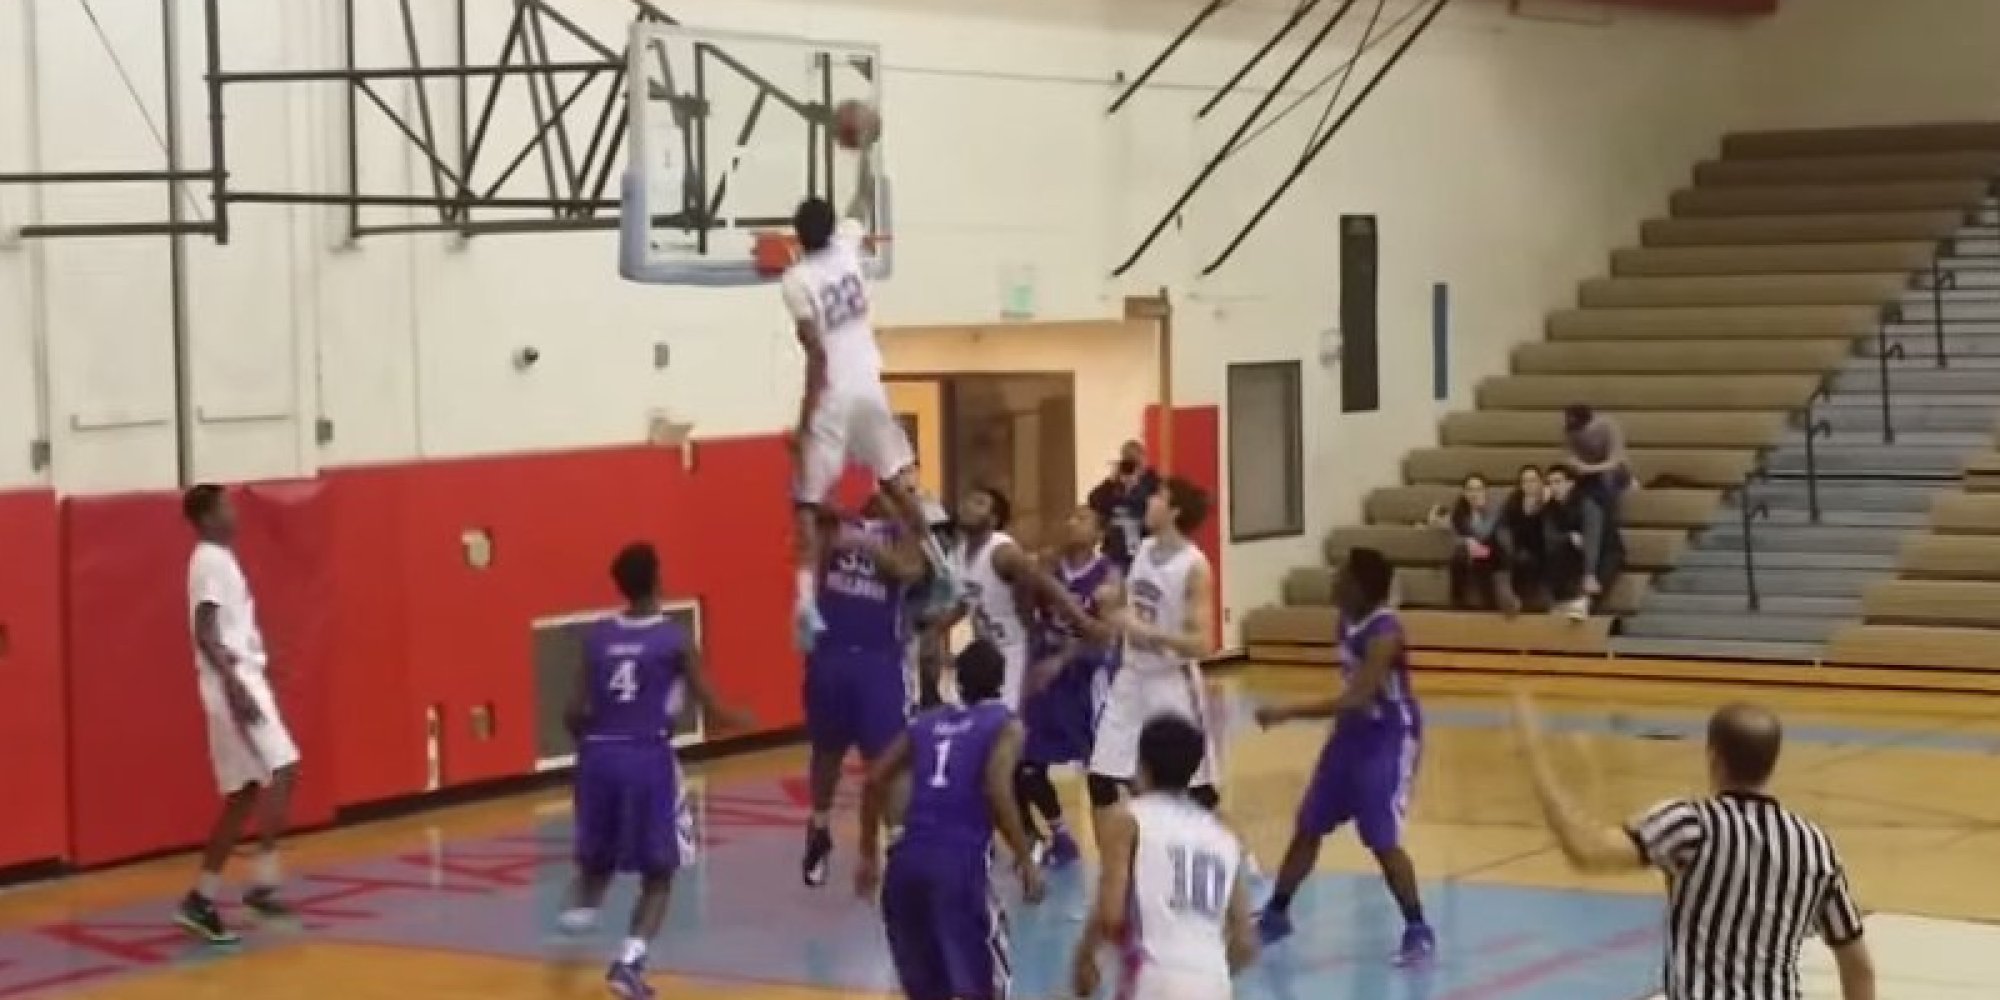 The Best Dunk Of The Year May Have Just Happened, And It Belongs To A